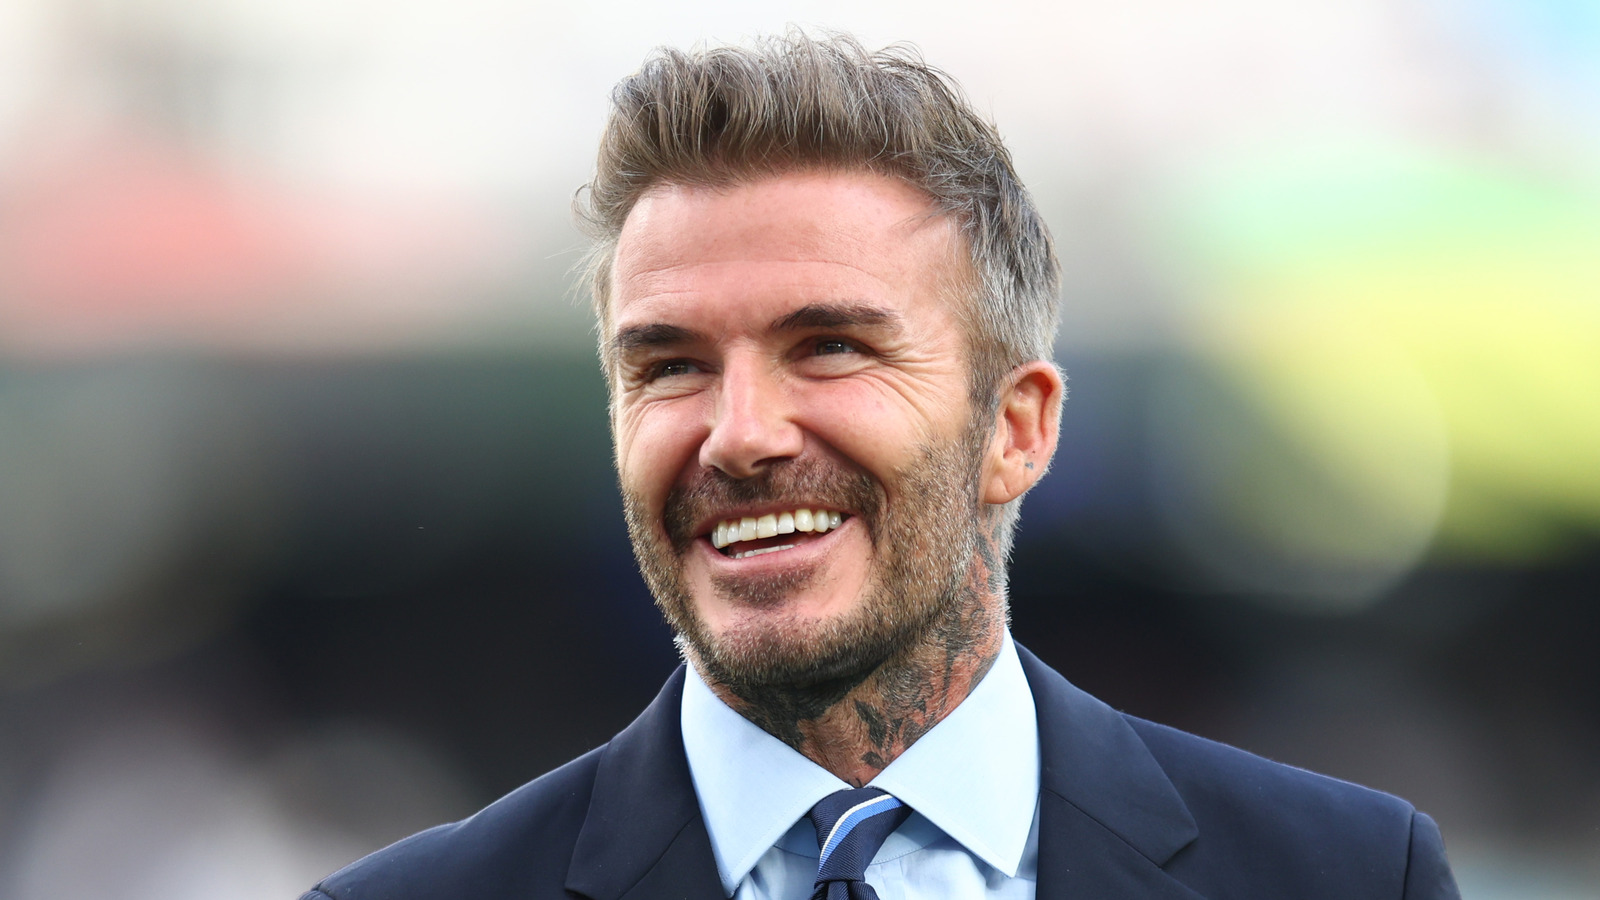 8 Cars In David Beckham's Collection That Prove He Has Great Taste